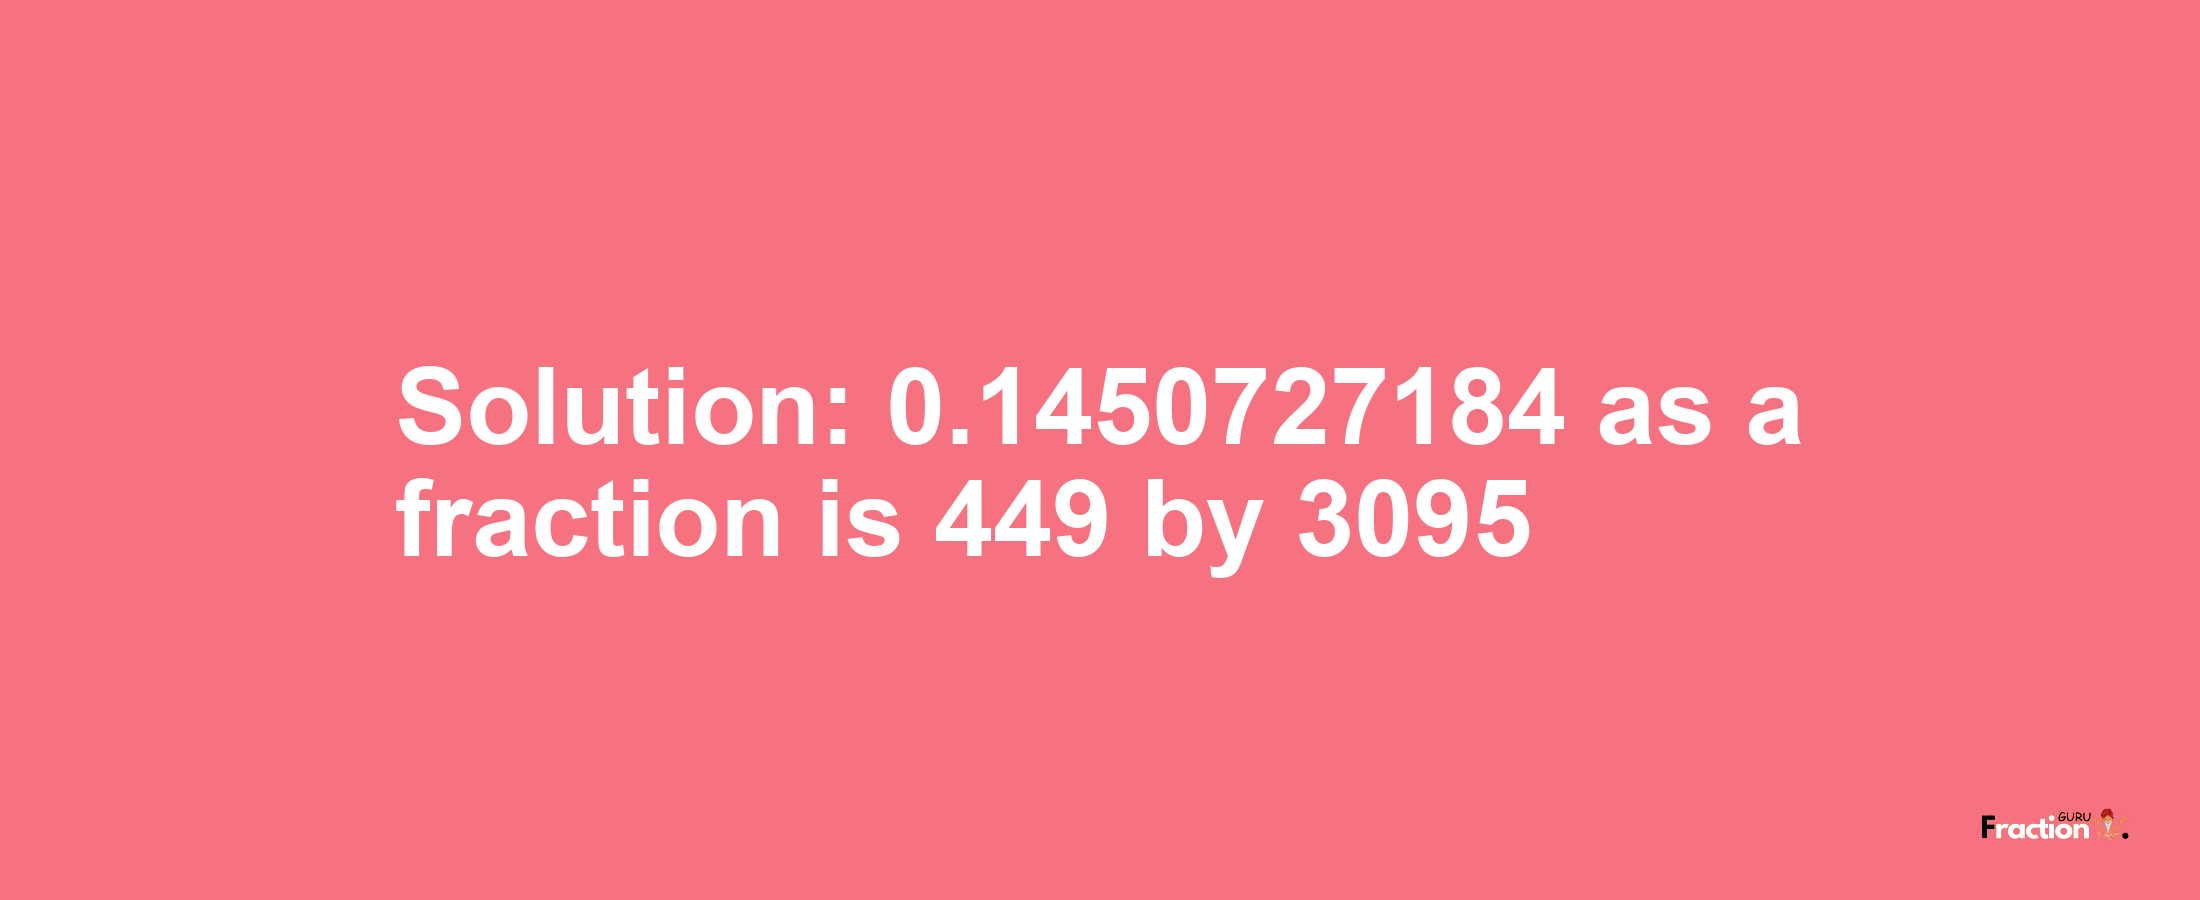 Solution:0.1450727184 as a fraction is 449/3095